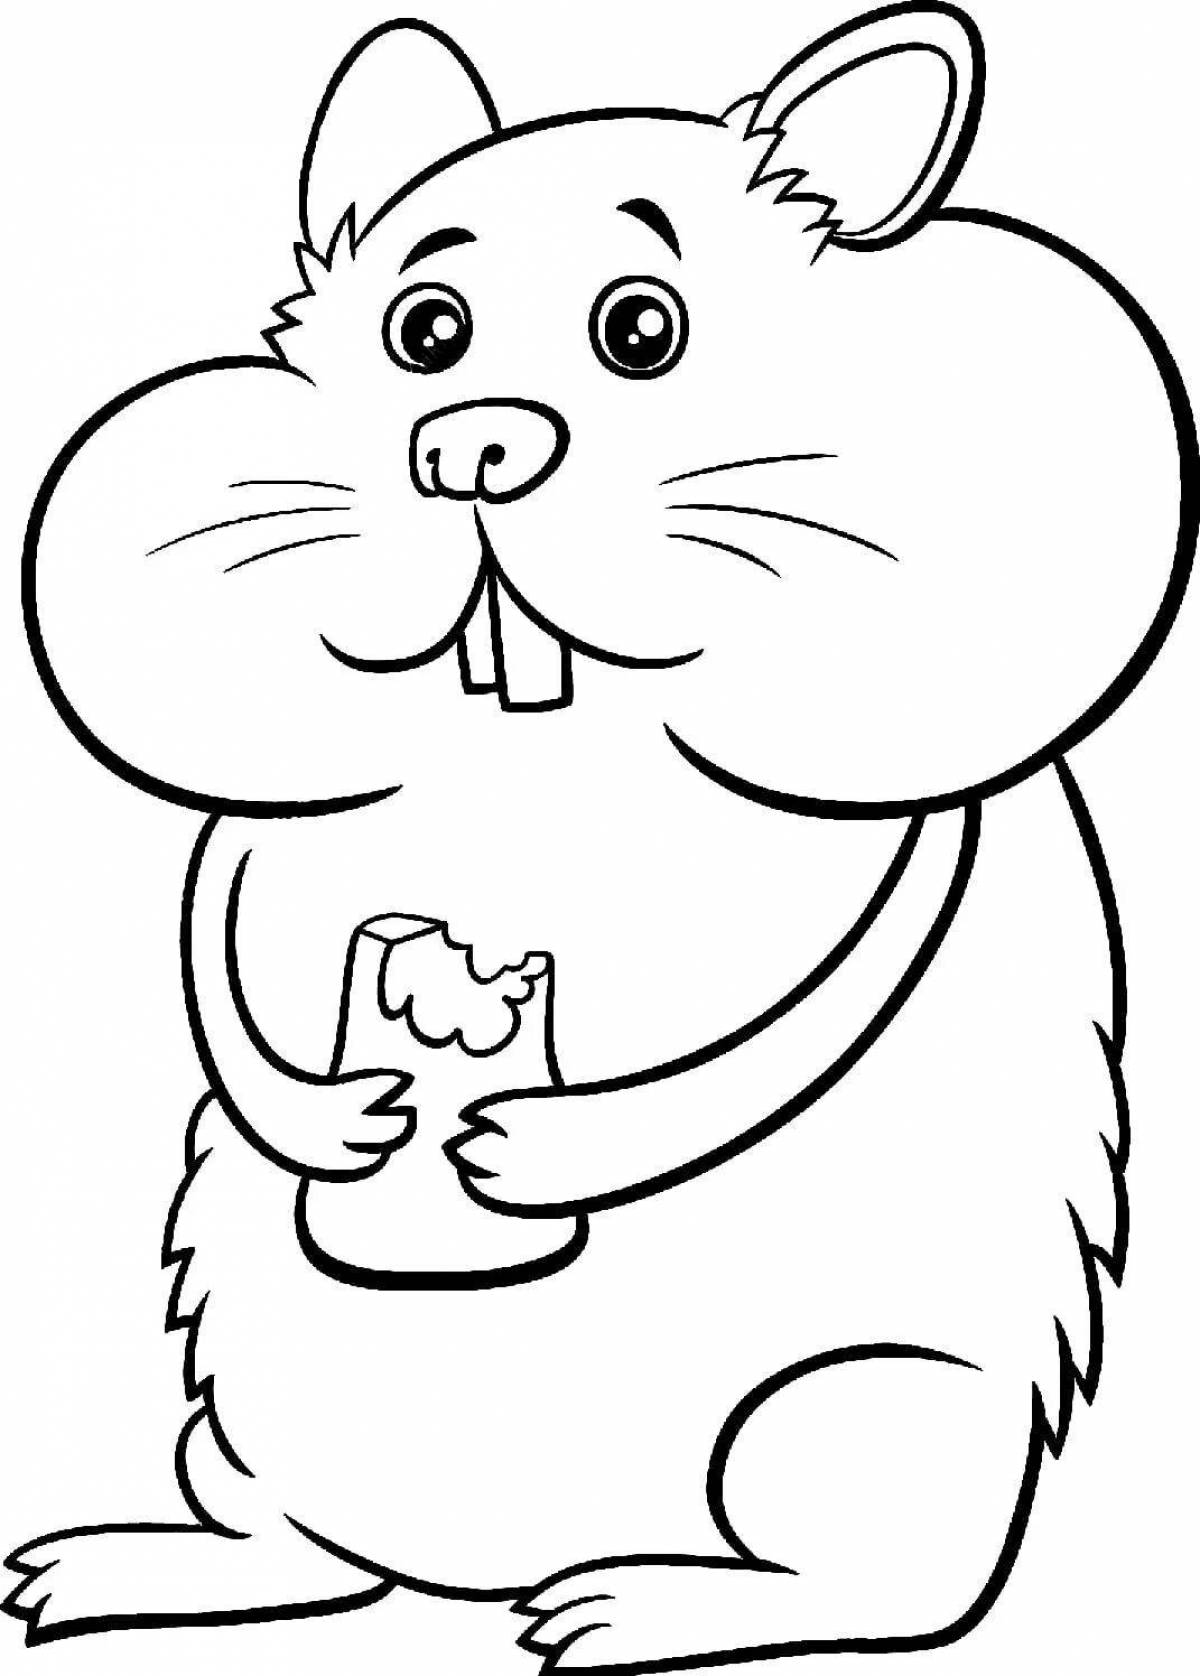 Live coloring hamster for baby